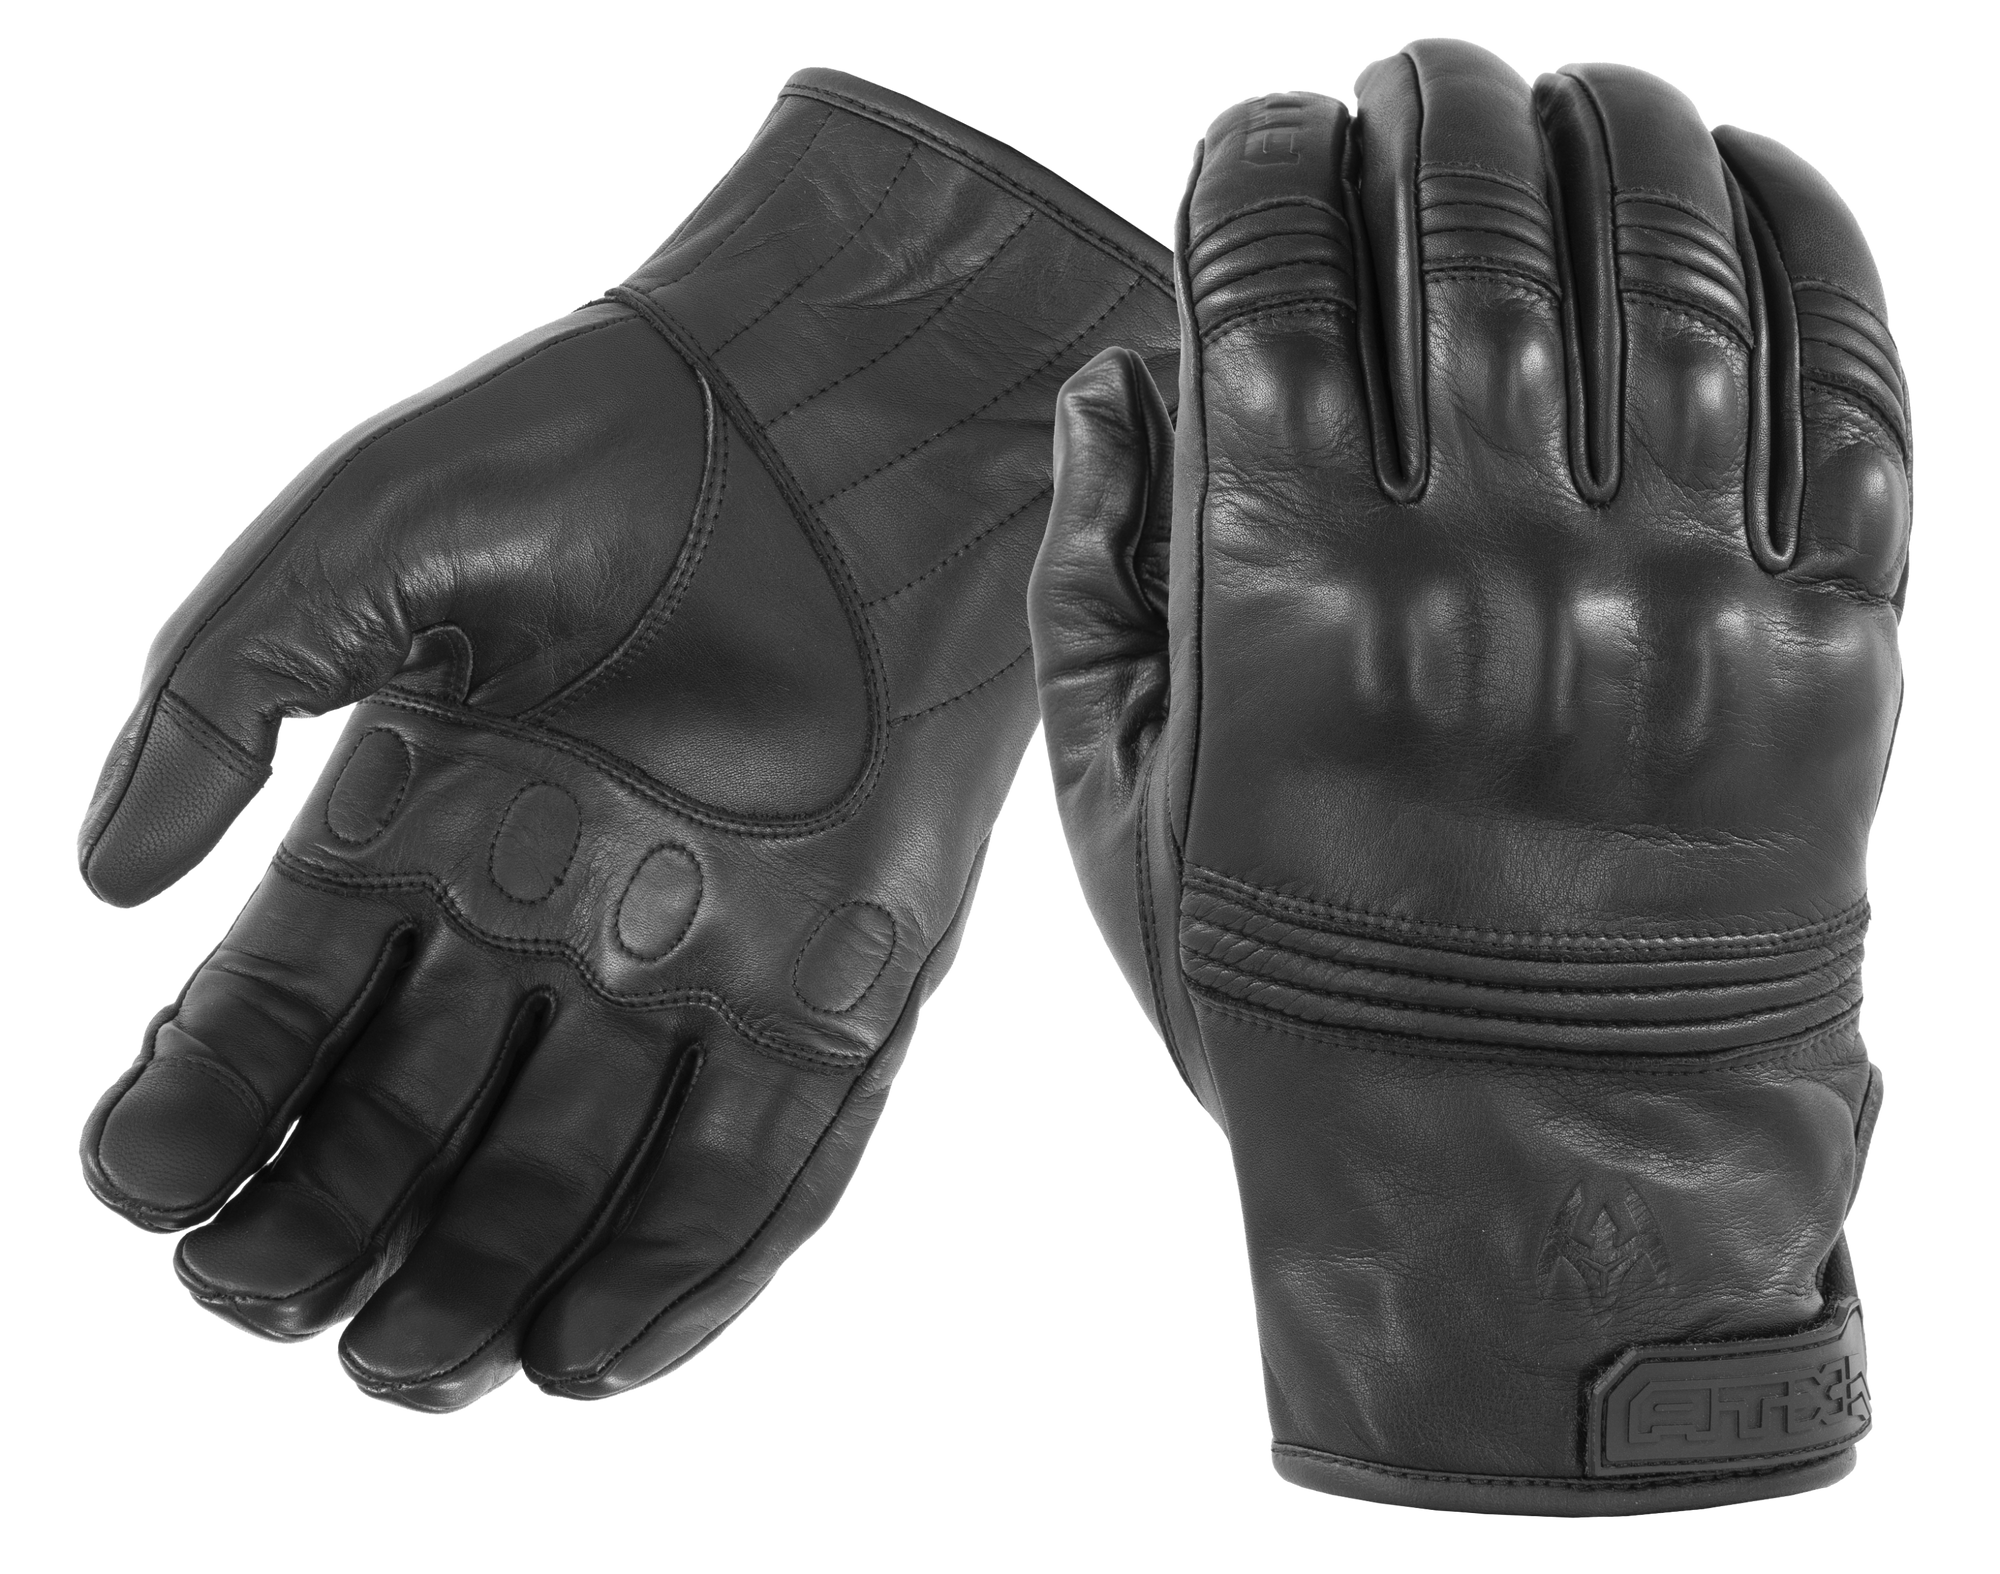 All-leather Gloves With Knuckle Armor - KRDM-ATX96SM